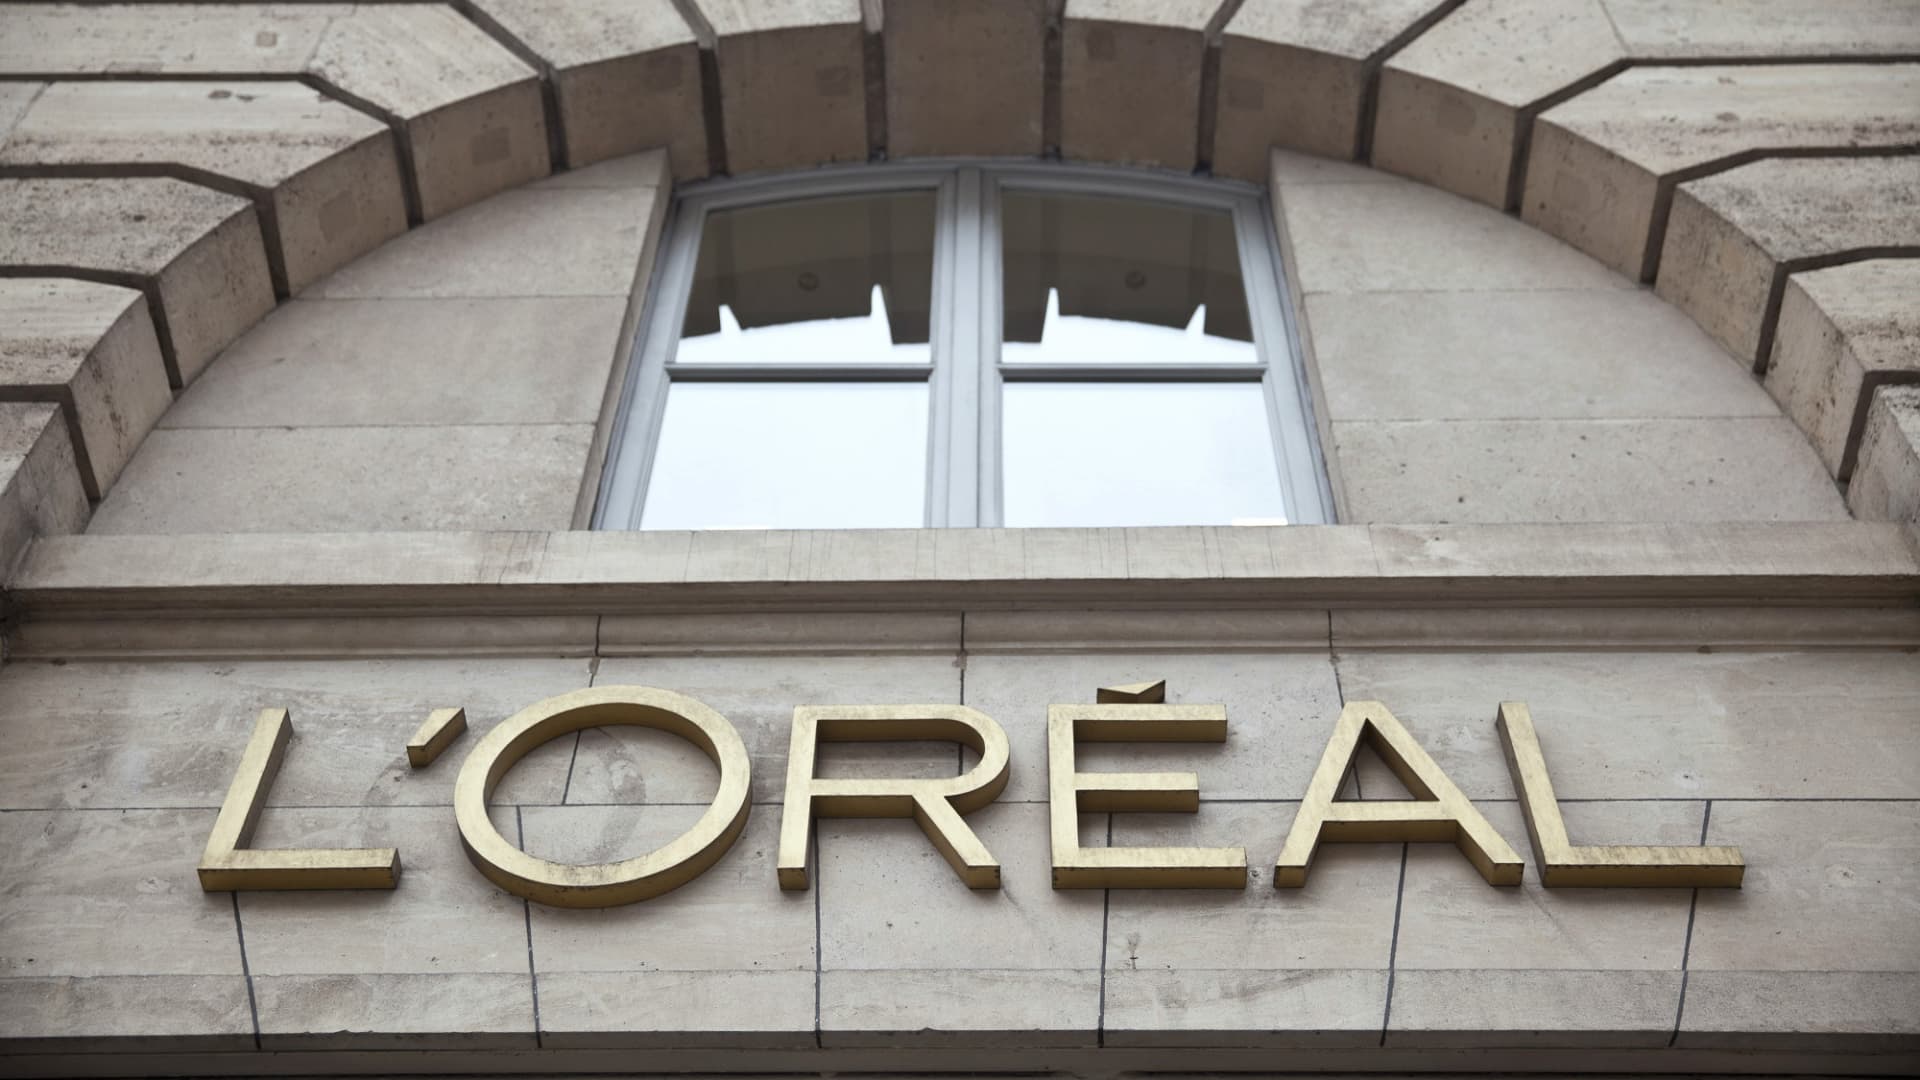 L'Oreal shares down 7% on lower-than-expected gross sales, slowdown in Asia